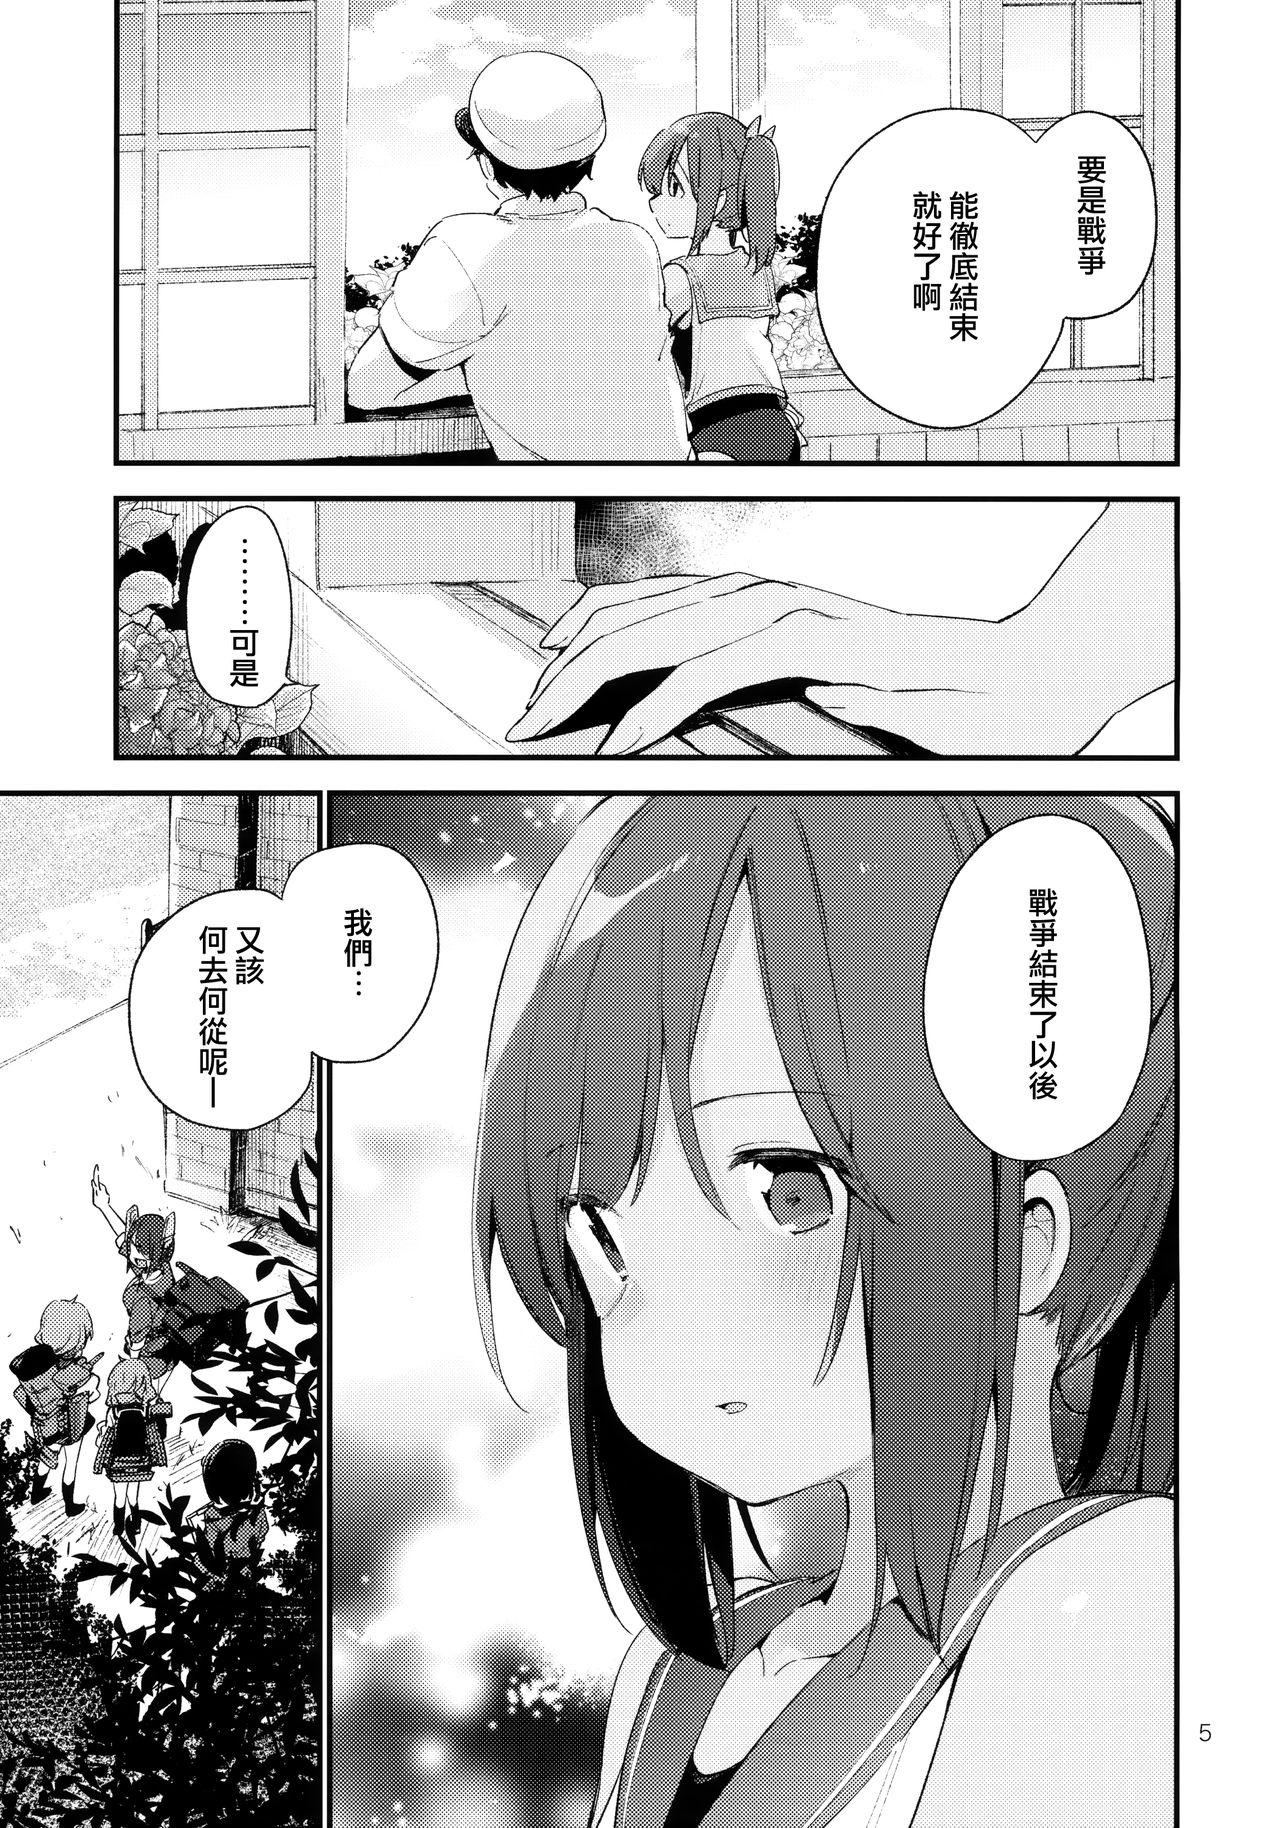 Fudendo 401-chan to Issho! 2 - Kantai collection Brazil - Page 6